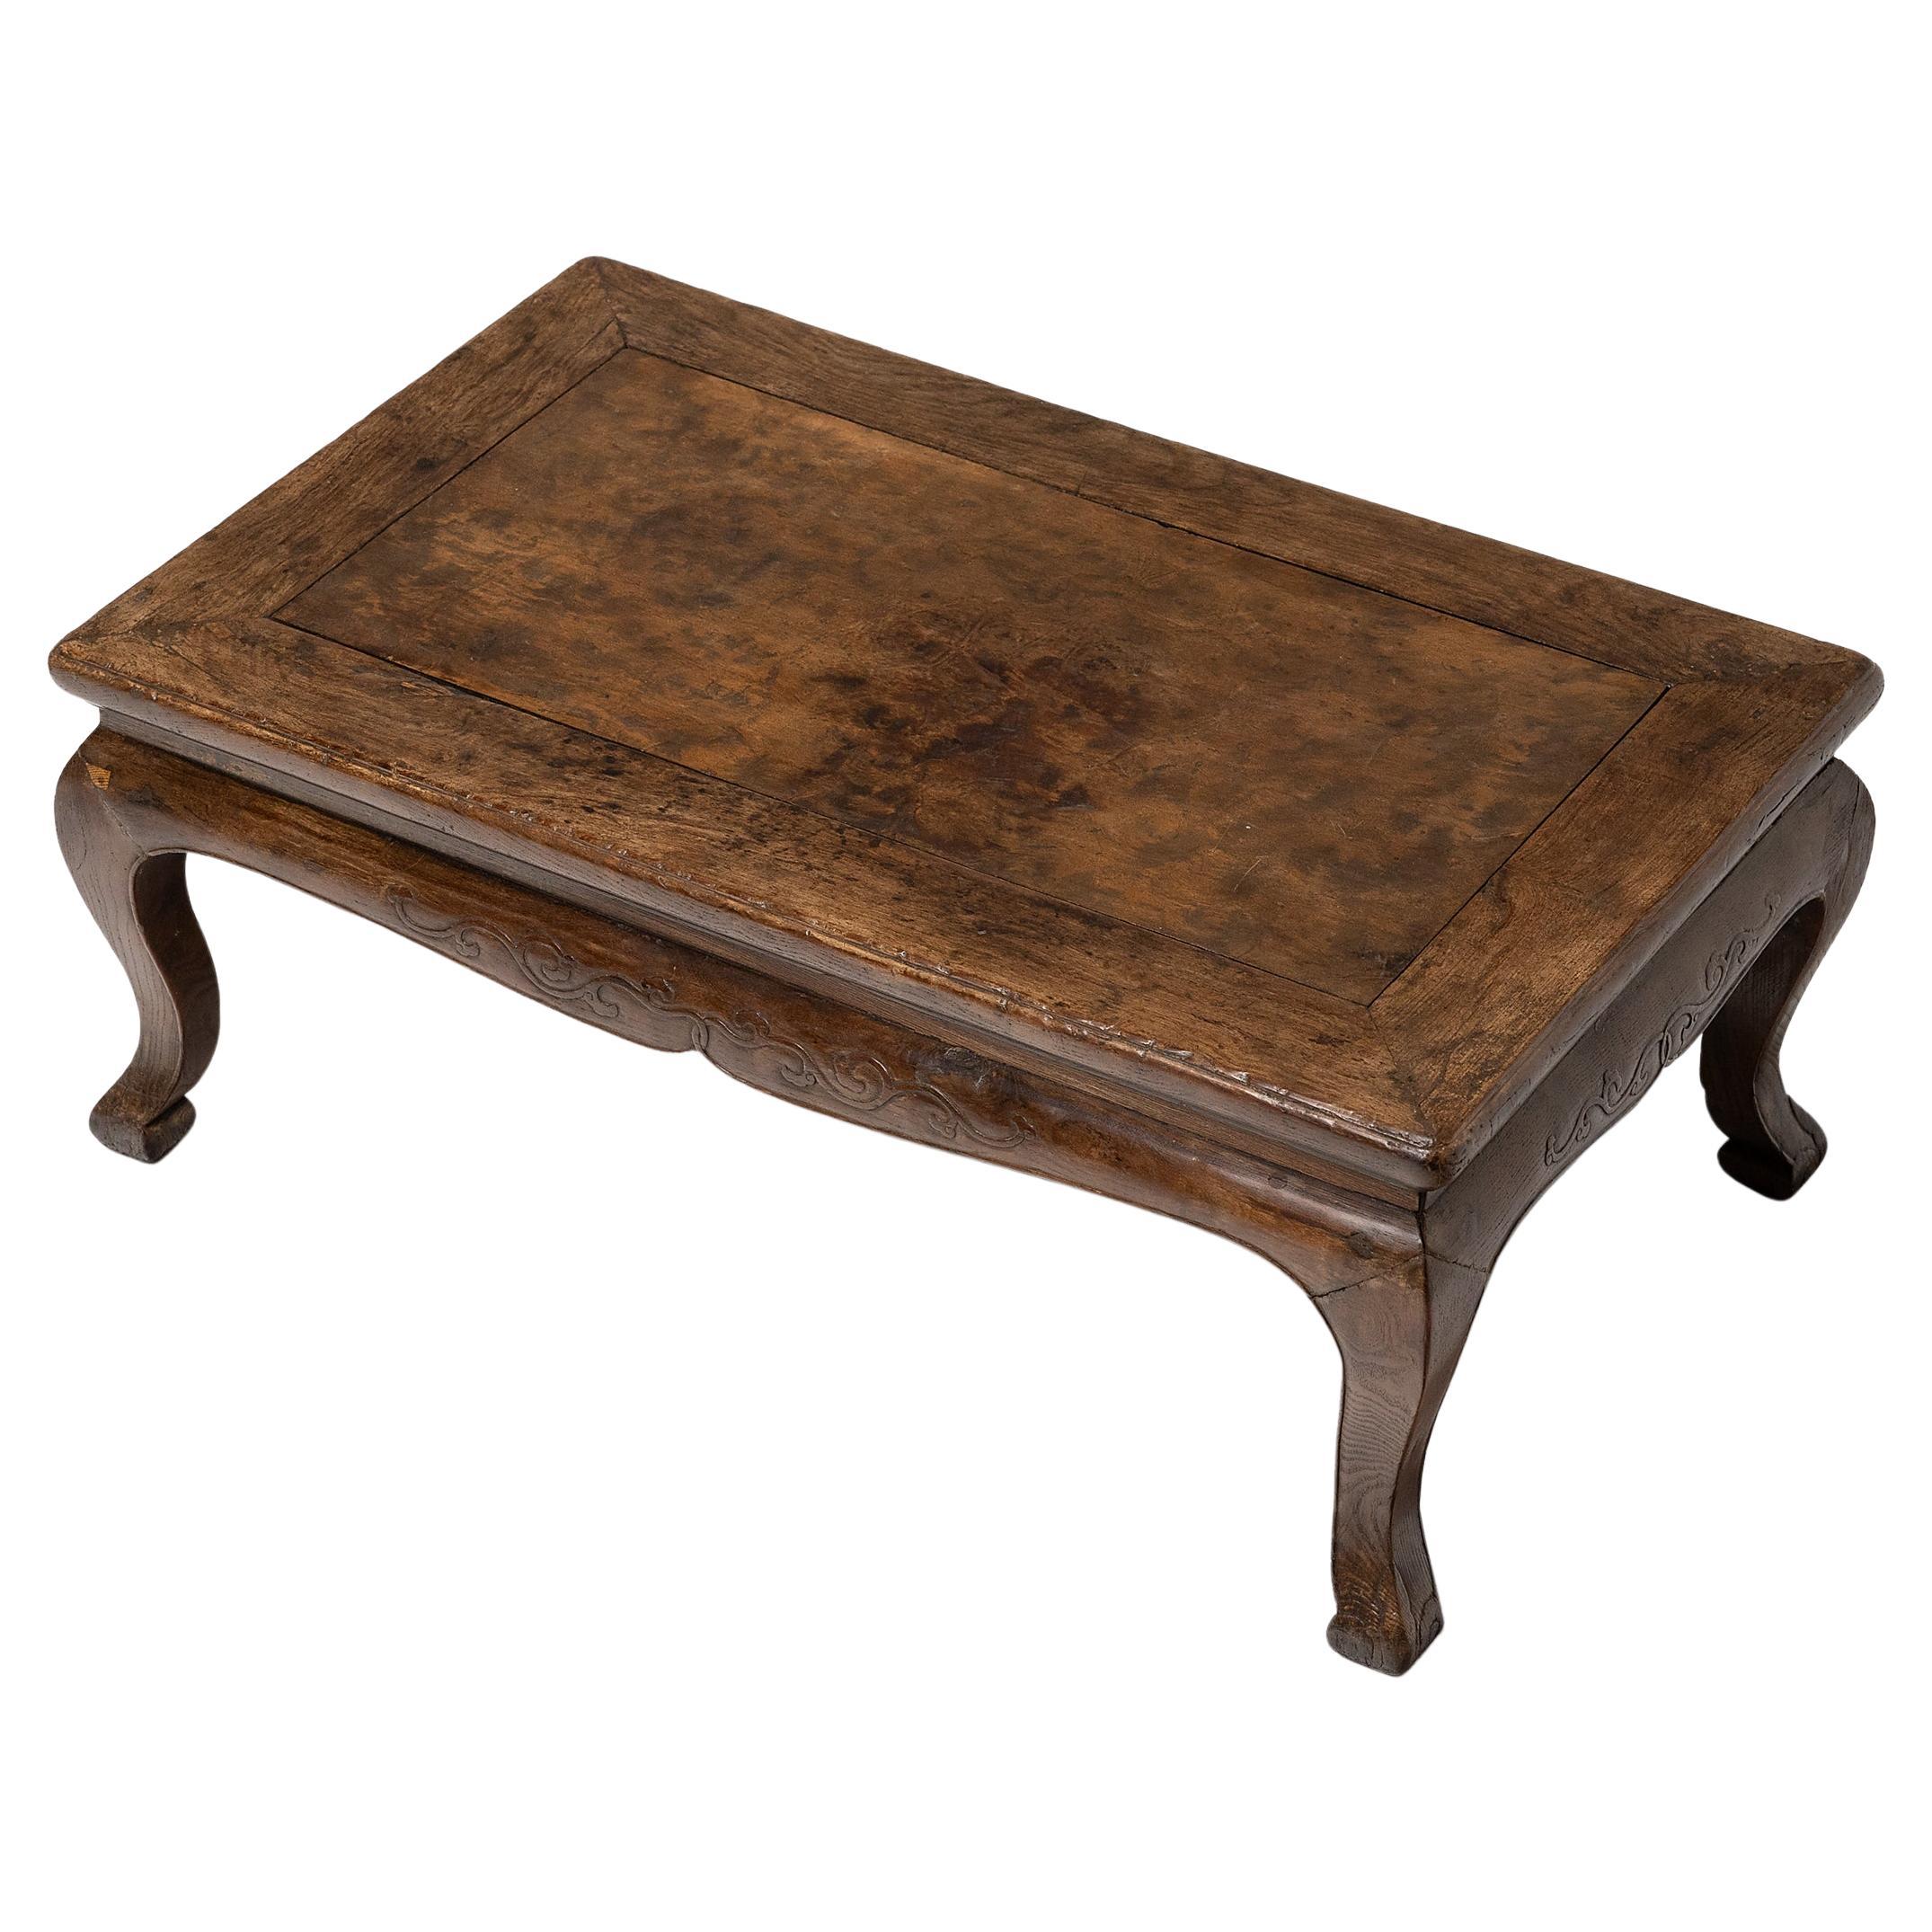 Chinese Low Burl Top Kang Table, c. 1850 For Sale